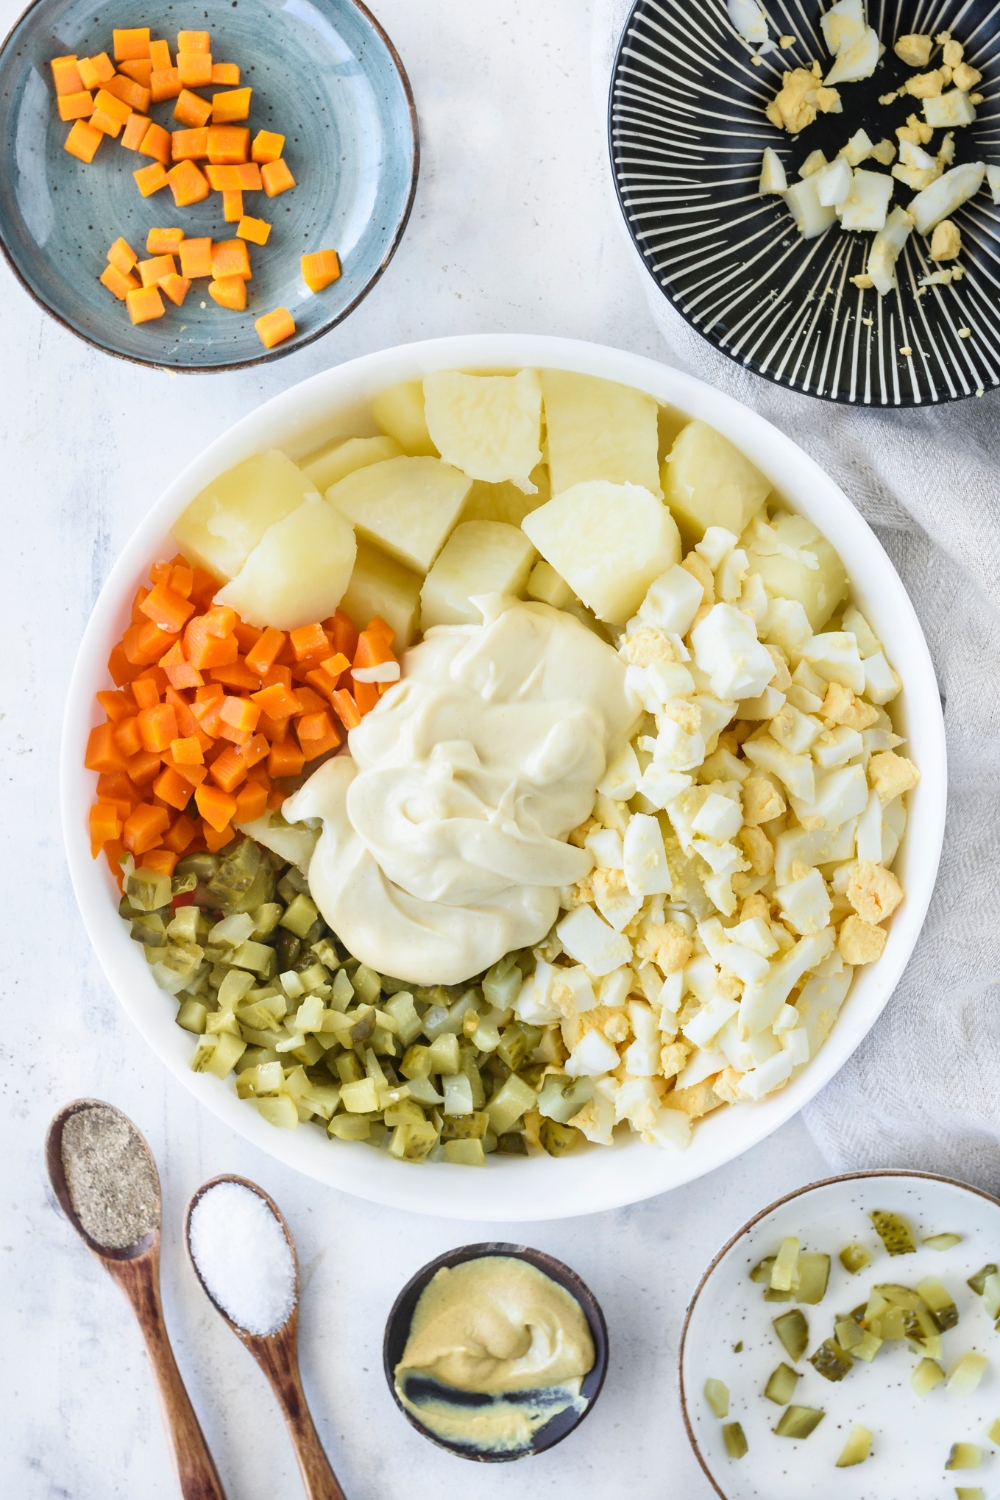 A bowl filled with chopped hard-boiled eggs, diced carrots, diced pickles, boiled potatoes and mayonnaise. The ingredients have not been mixed together.